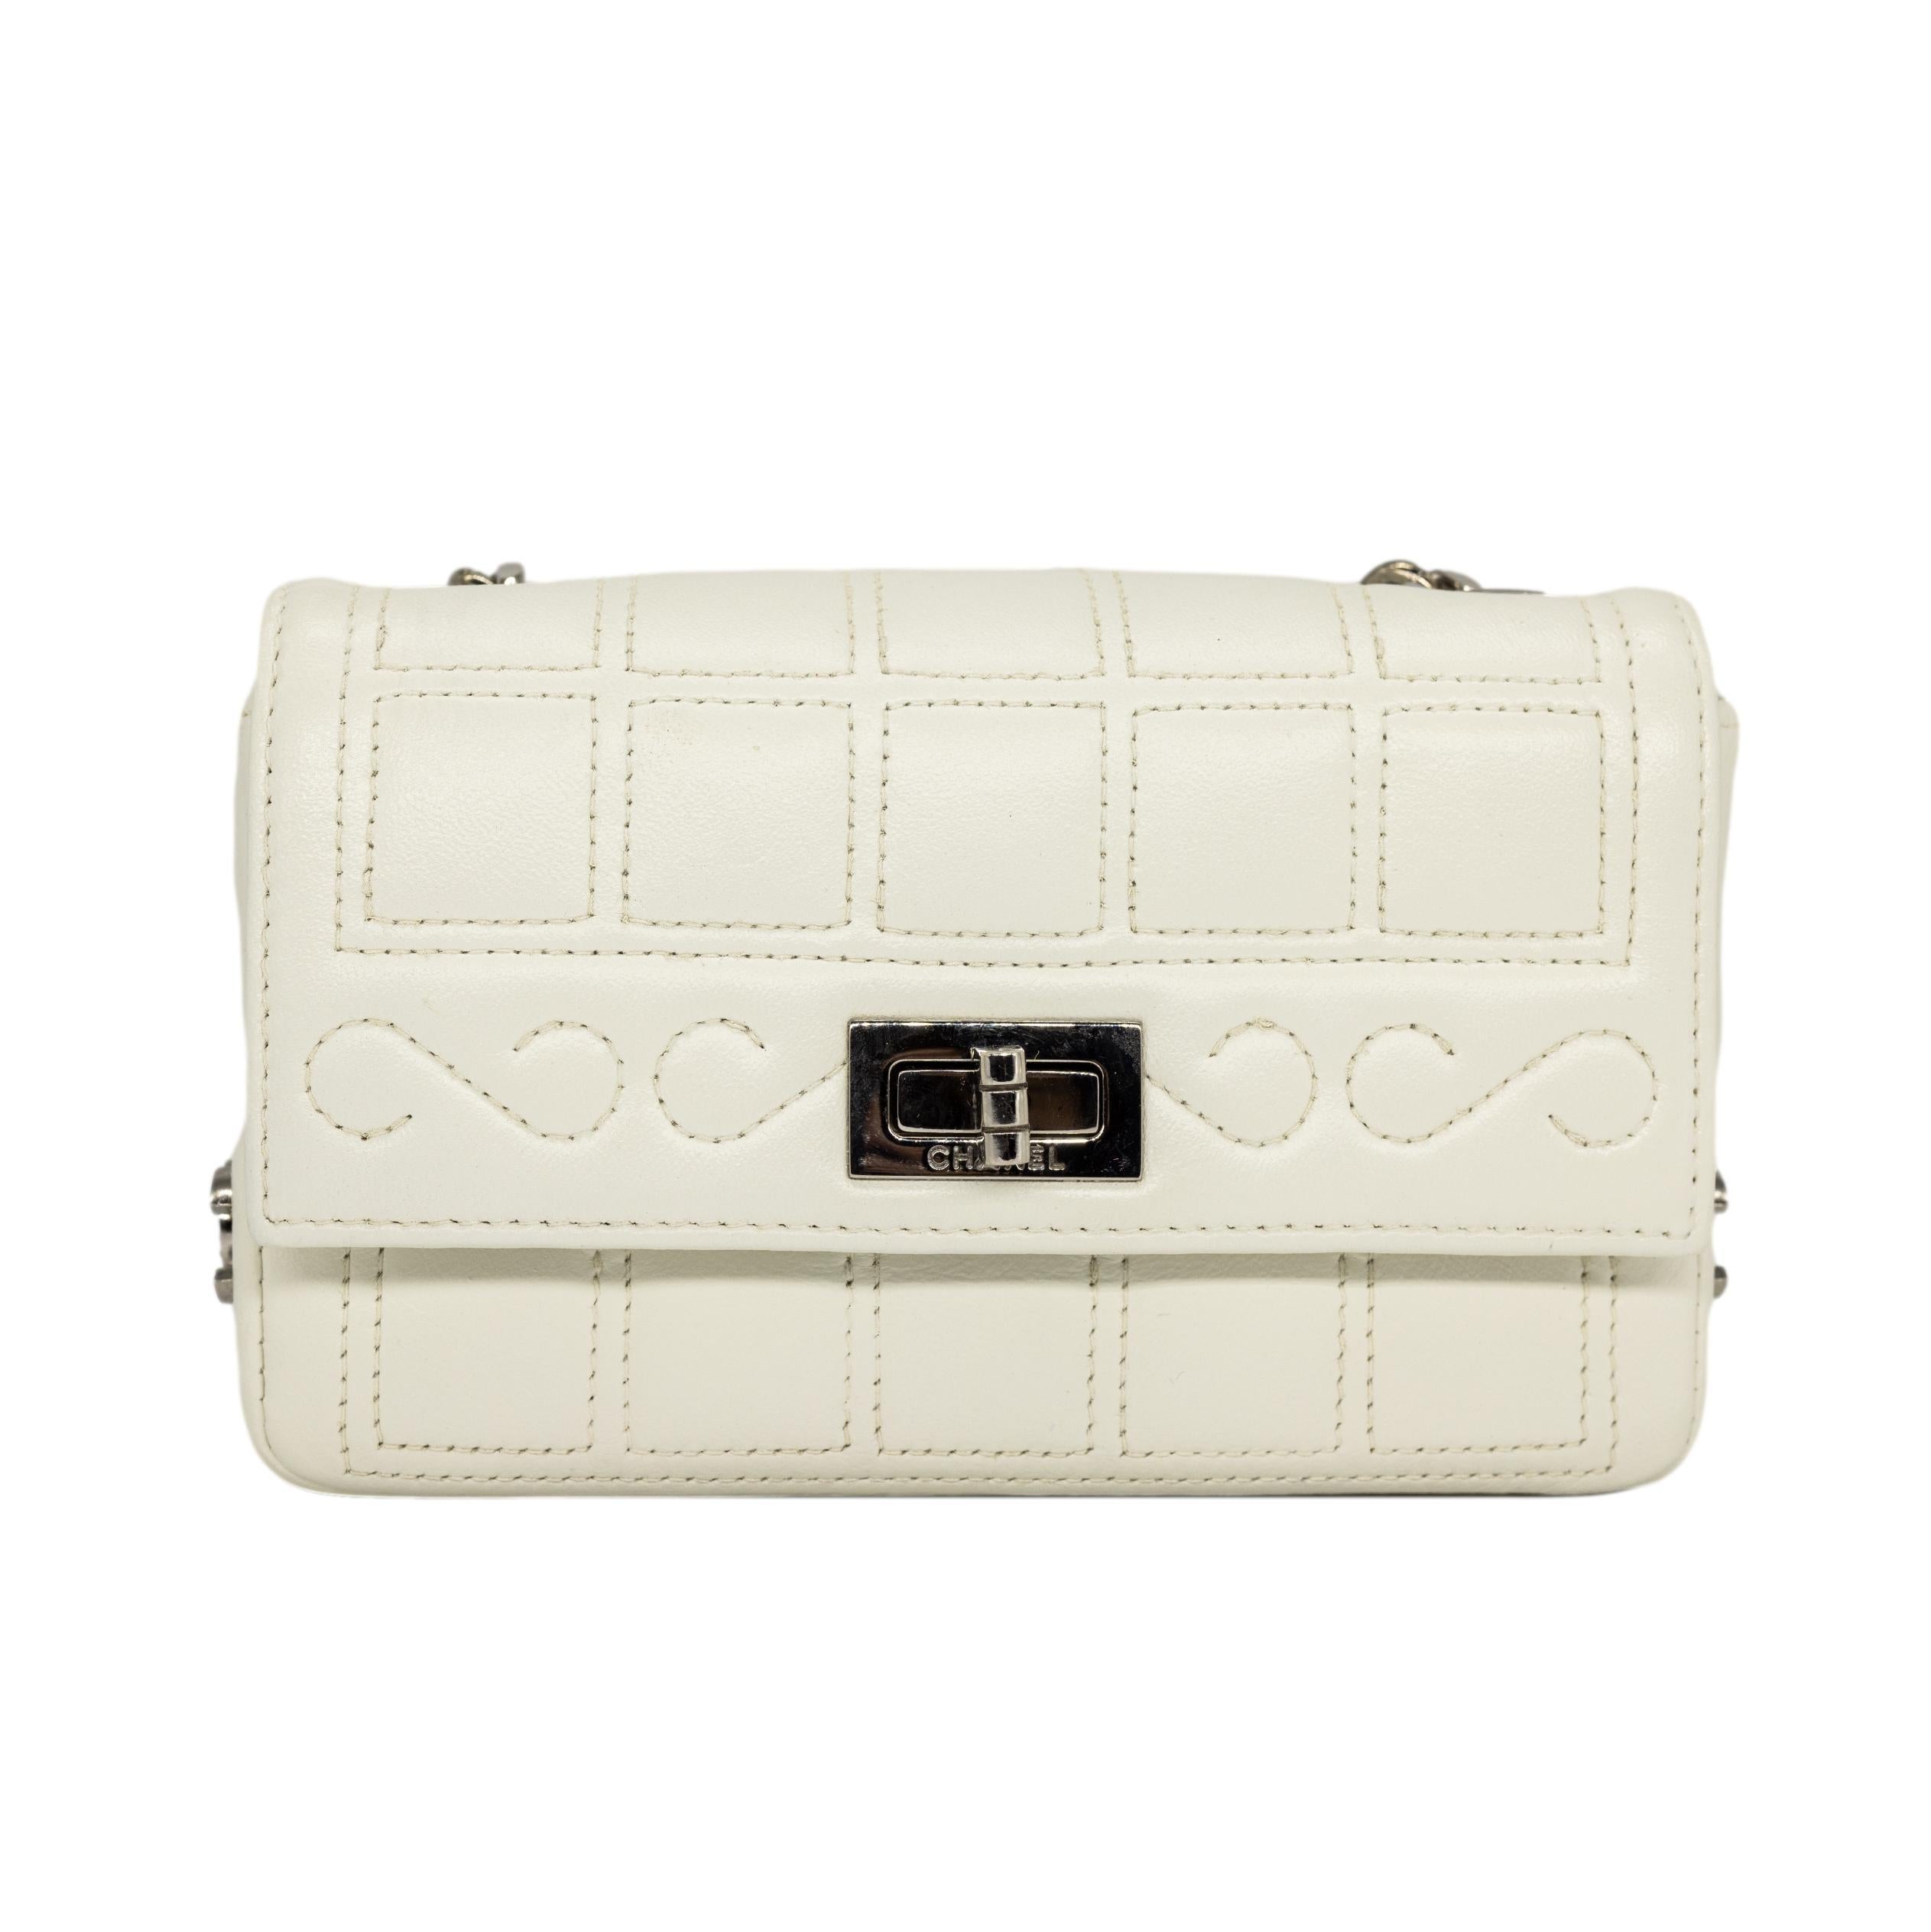 Chanel Limited Edition 2.55 Re-Issue White Mini Chocolate Bar Shoulder Bag, 2002 2